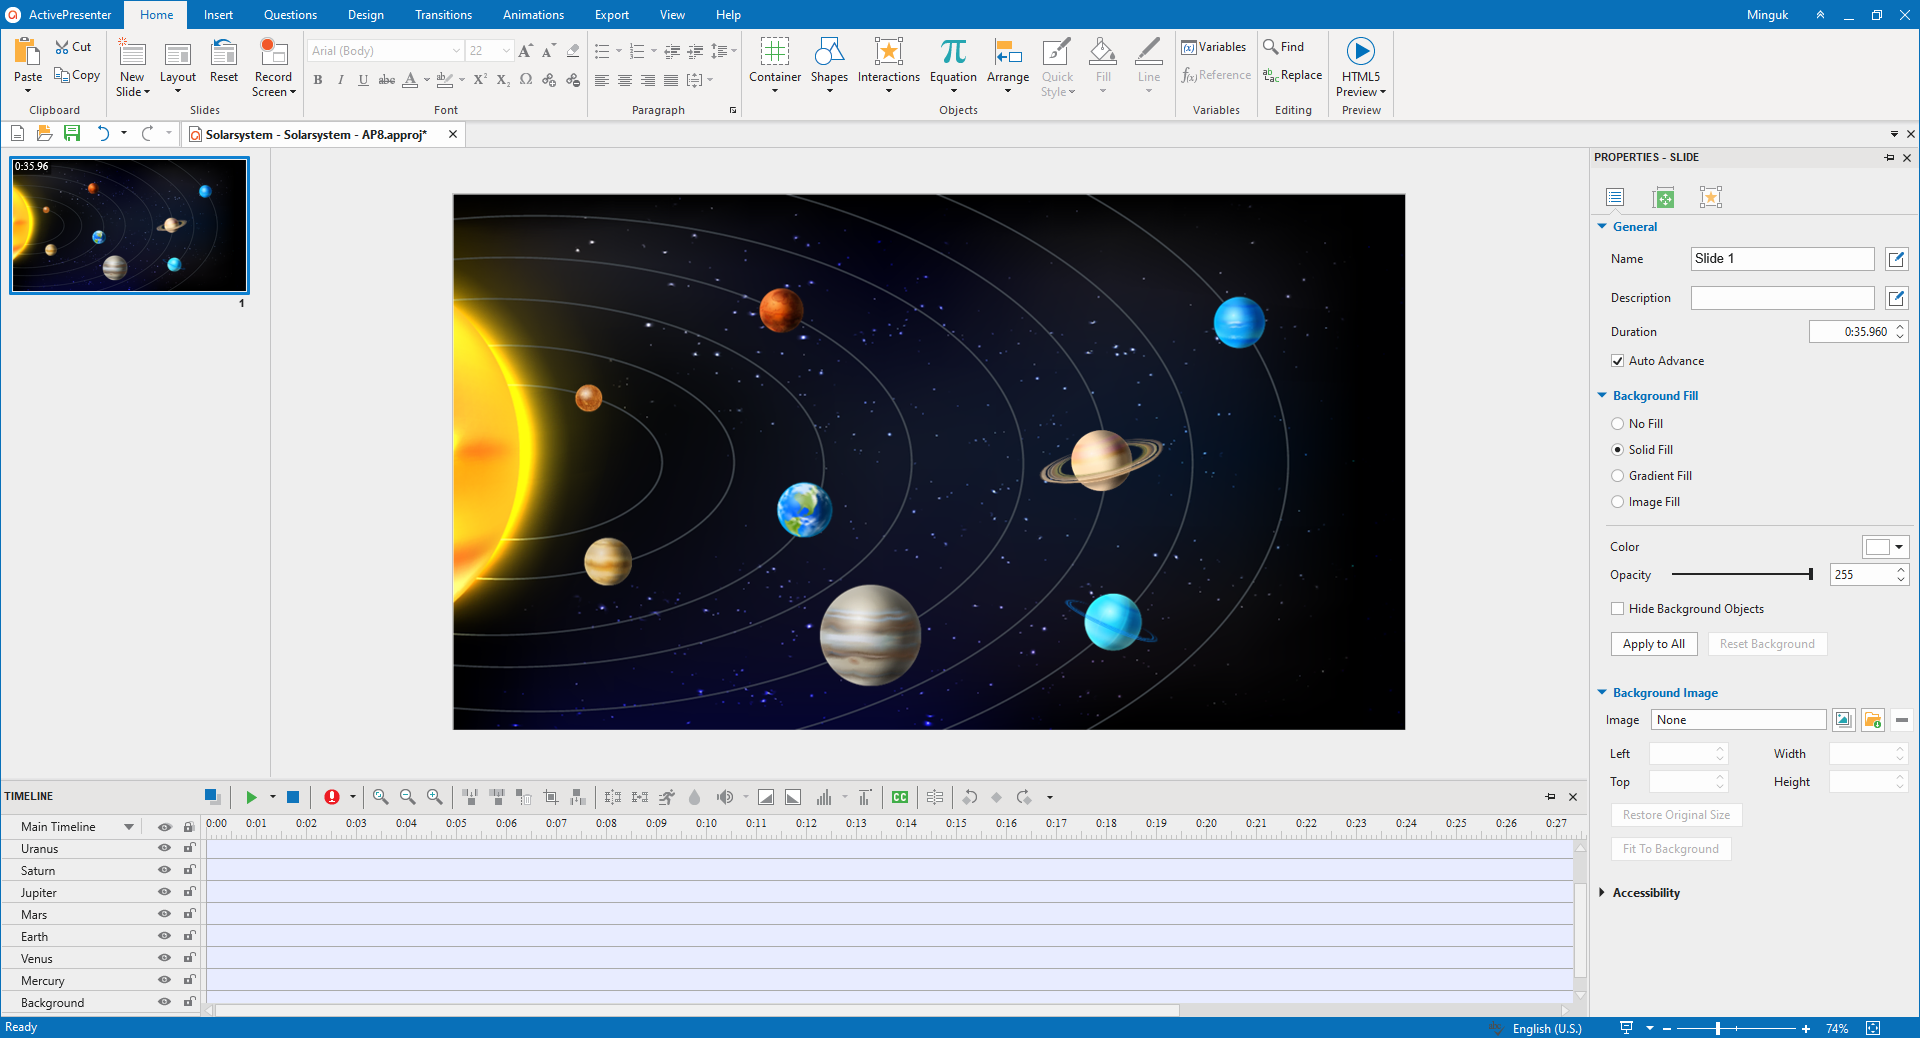 Add Planet Images to Background to create interactive images